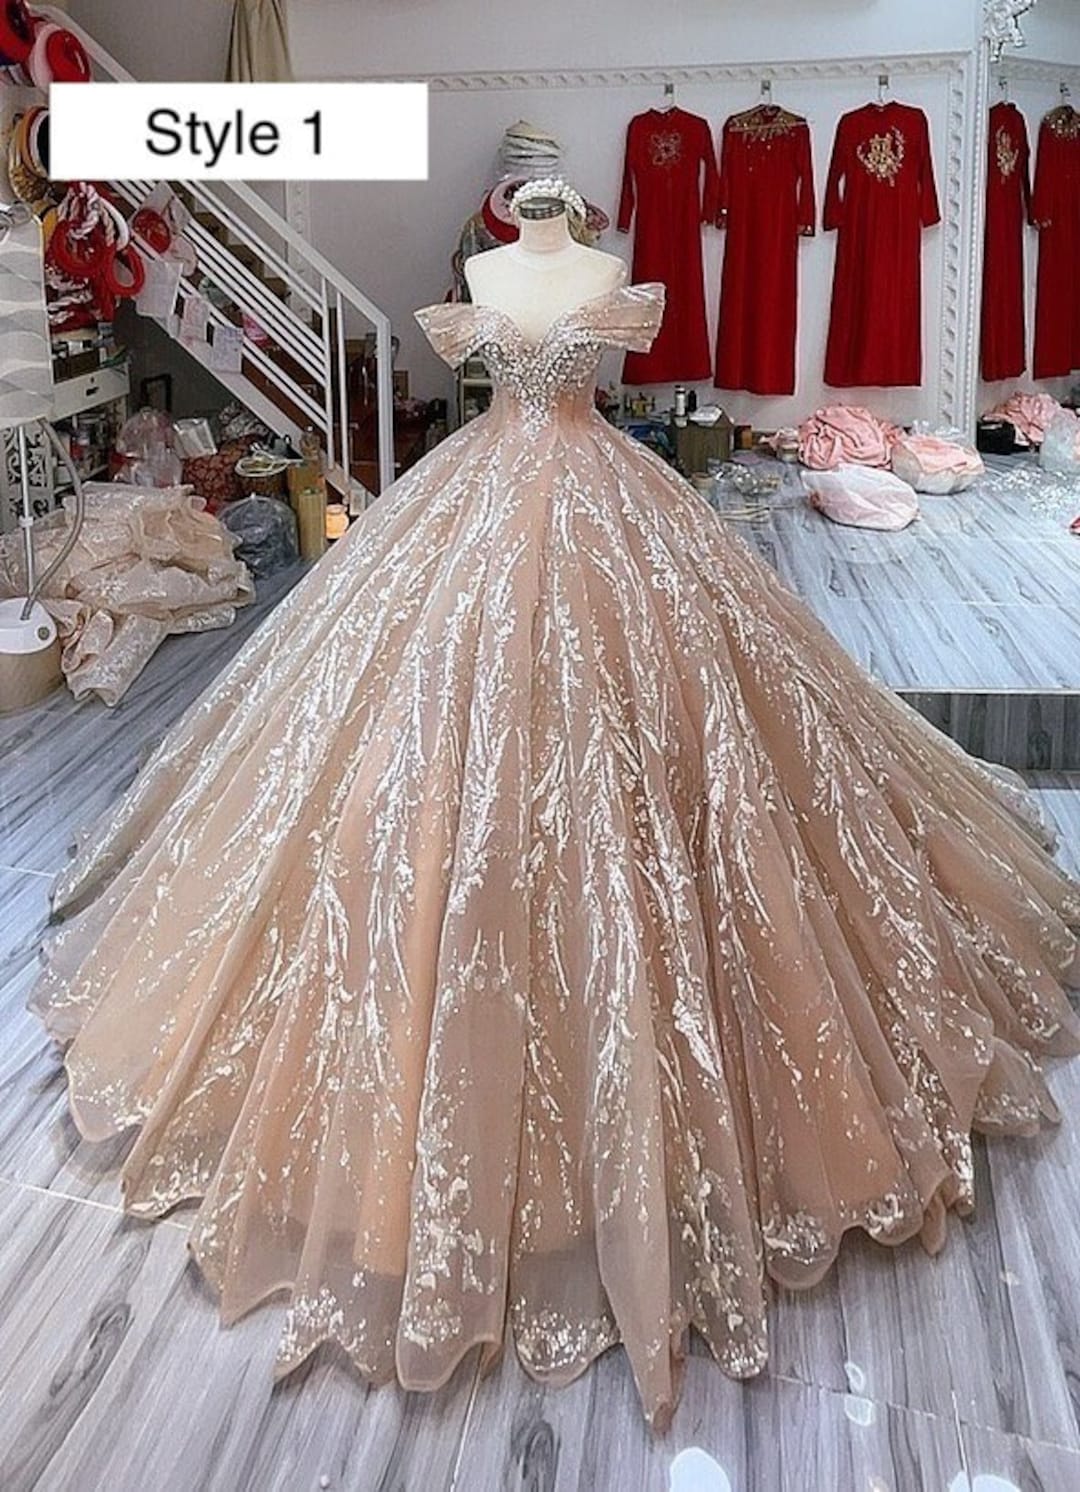 Sweet or dusty pink sparkle drop sleeves beaded lace ball gown